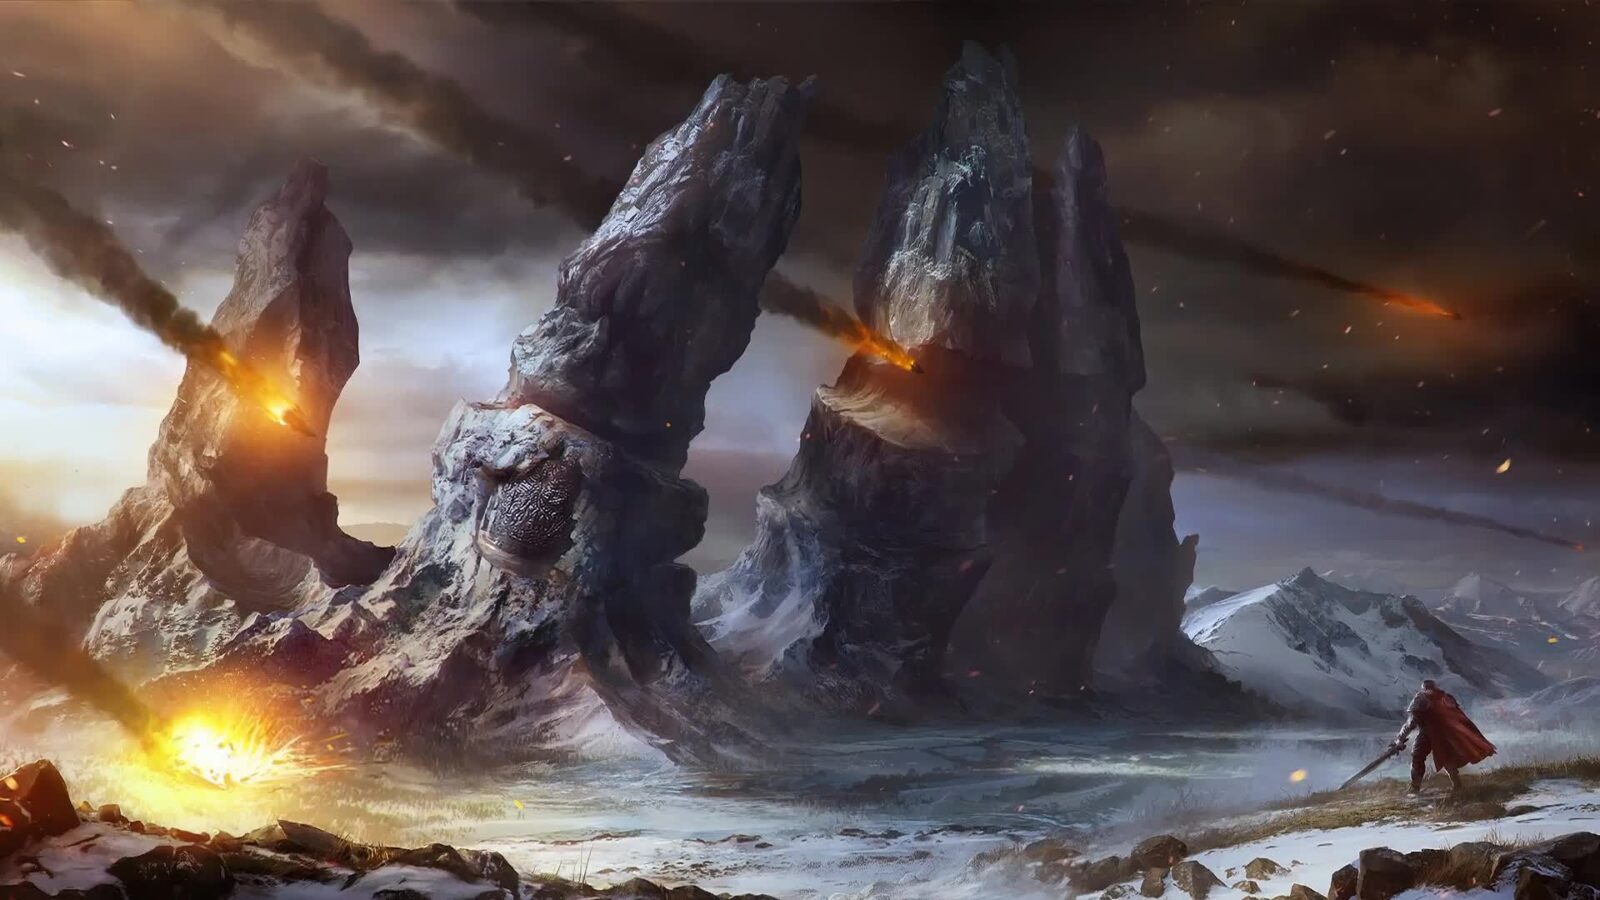 LiveWallpapers4Free.com | Lords Of The Fallen Video Game Meteor Storm - Free Animated Wallpaper